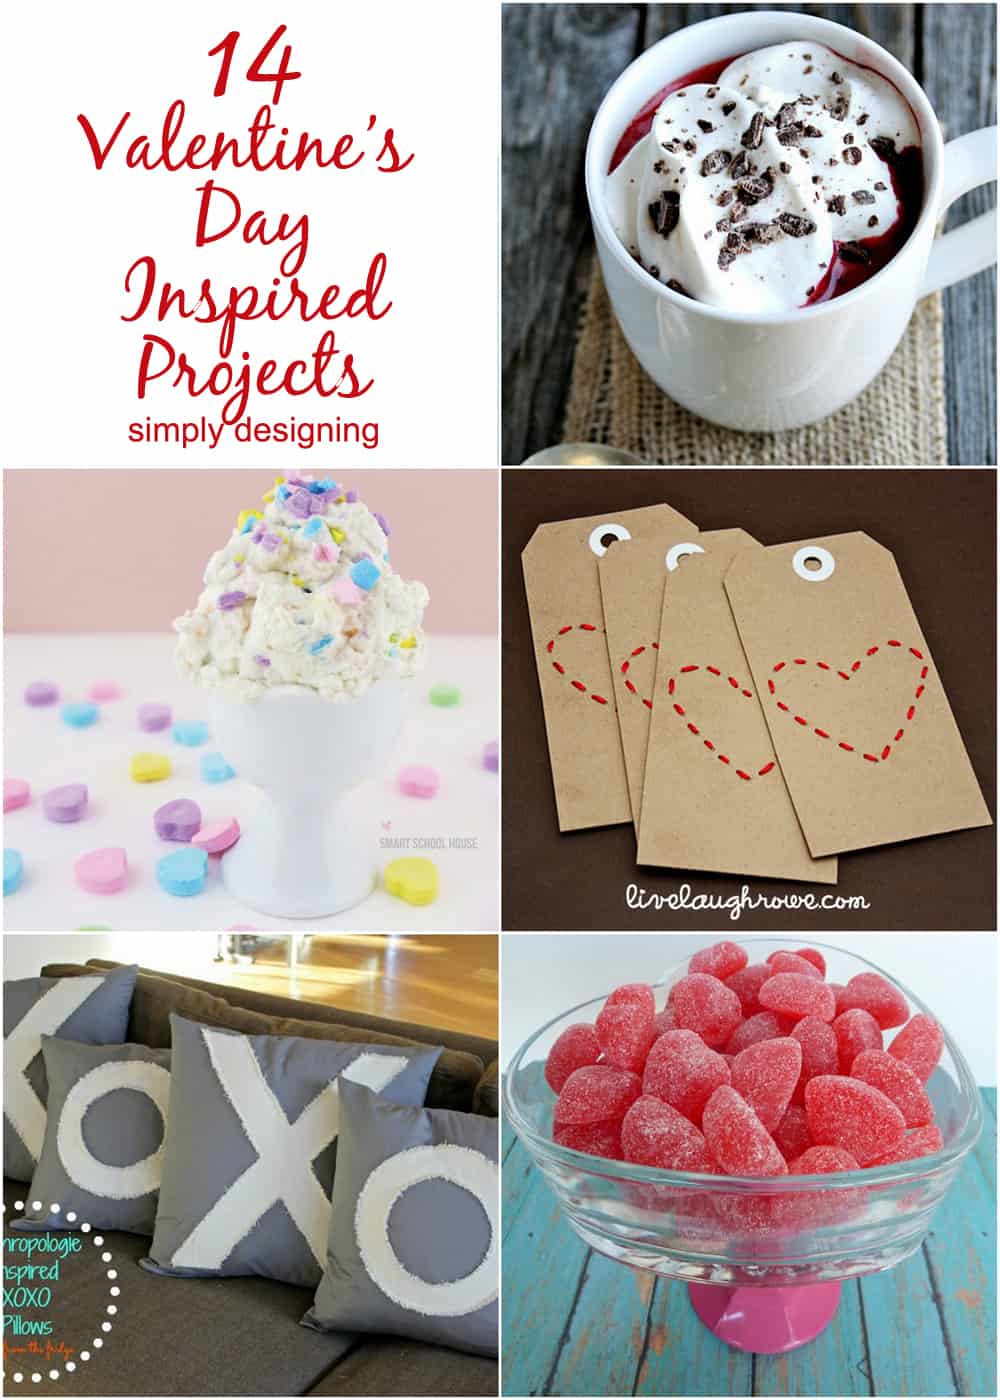 14+Valentines+Day+Inspired+Projects1 14 Valentine's Day Inspired Projects 11